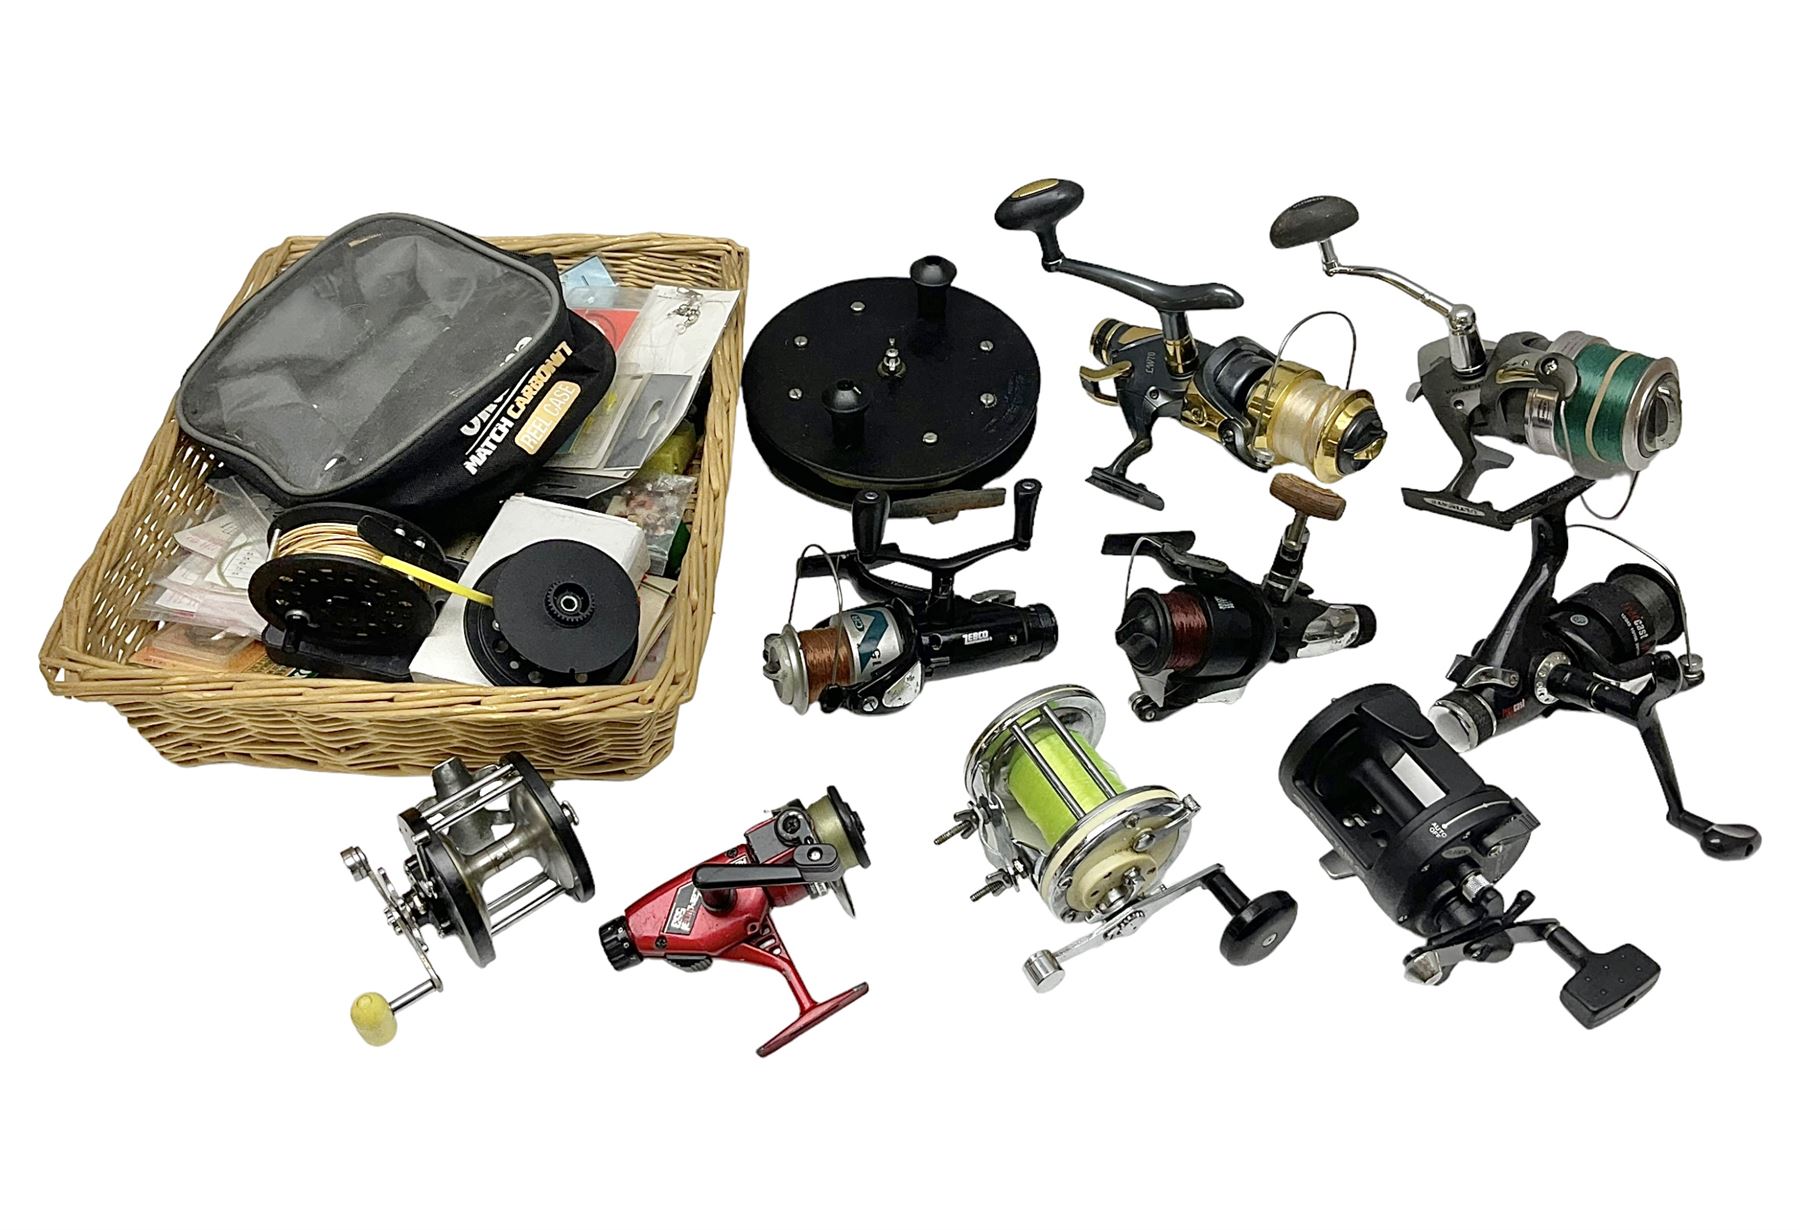 Sold at Auction: Pair of Vintage Baitcasting Reels Incl. Zebco